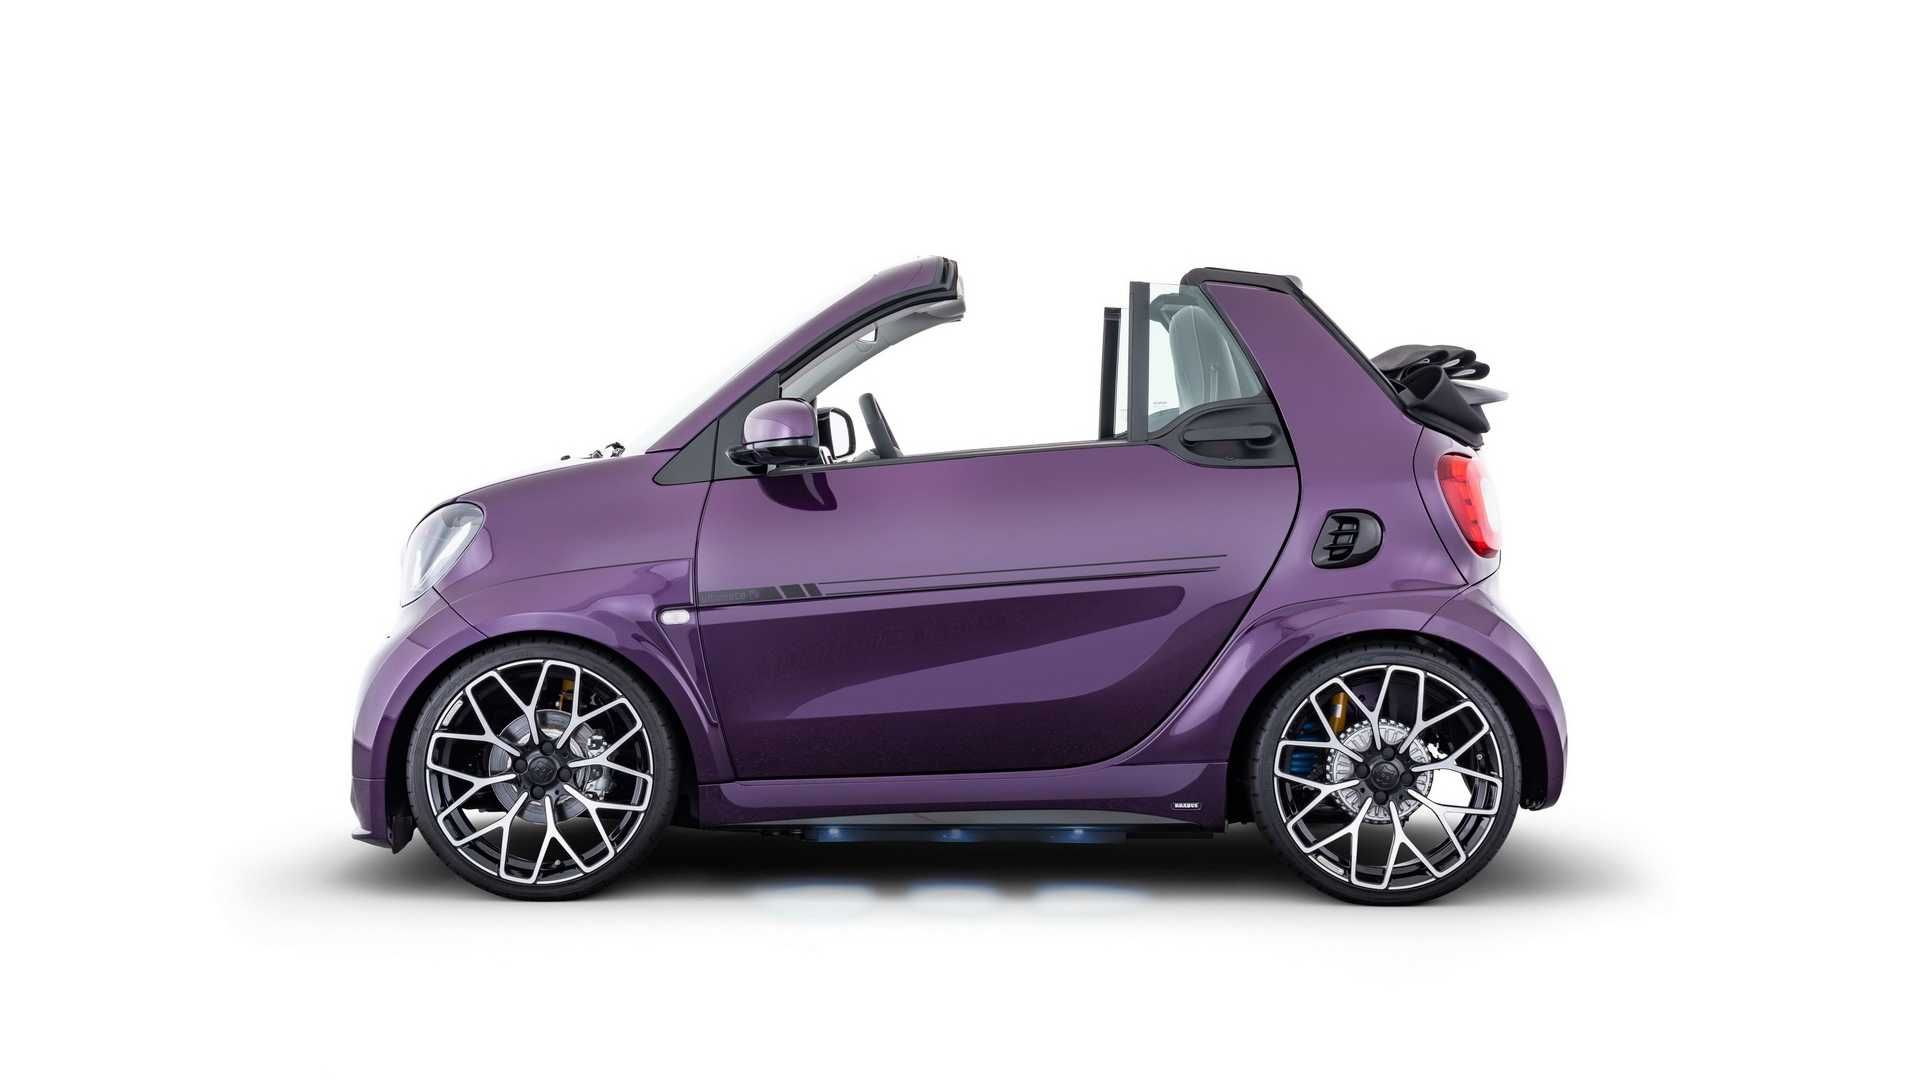 Brabus Smart EQ Fortwo Racing Green Edition Is For The Stylish At Heart